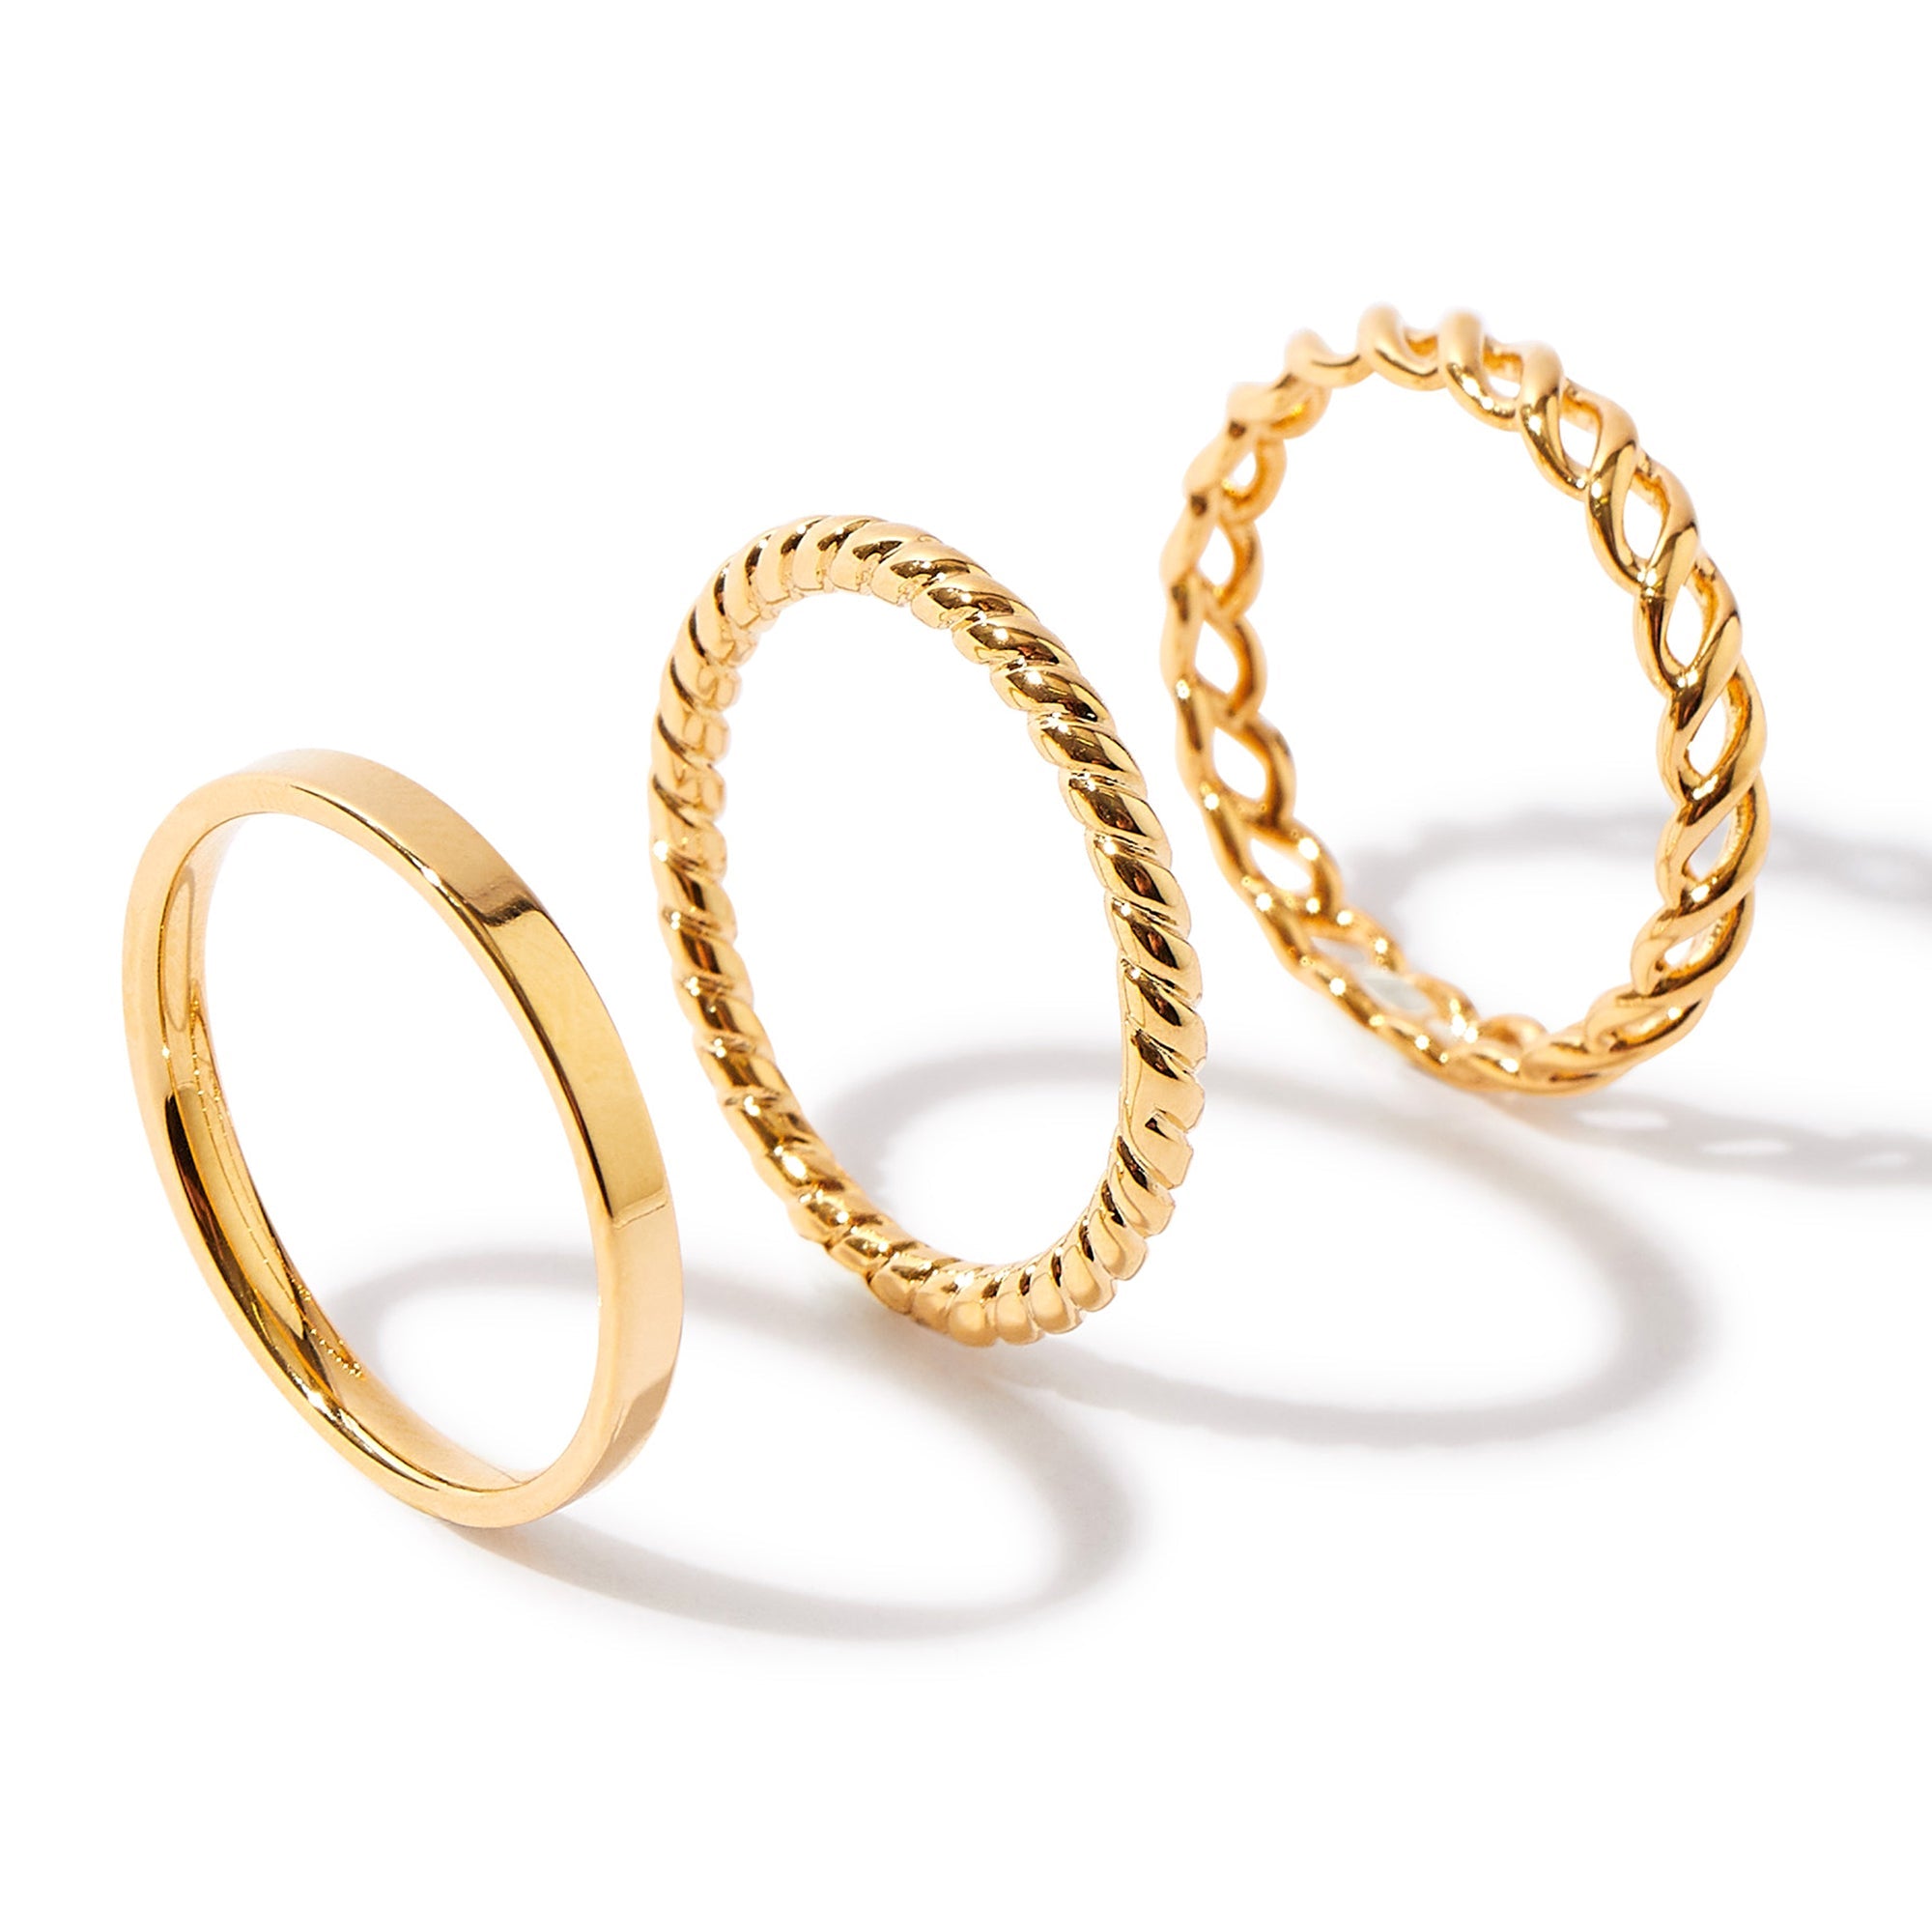 Real Gold Plated 3 Pack Band Stacking Rings For Women By Accessorize London Large